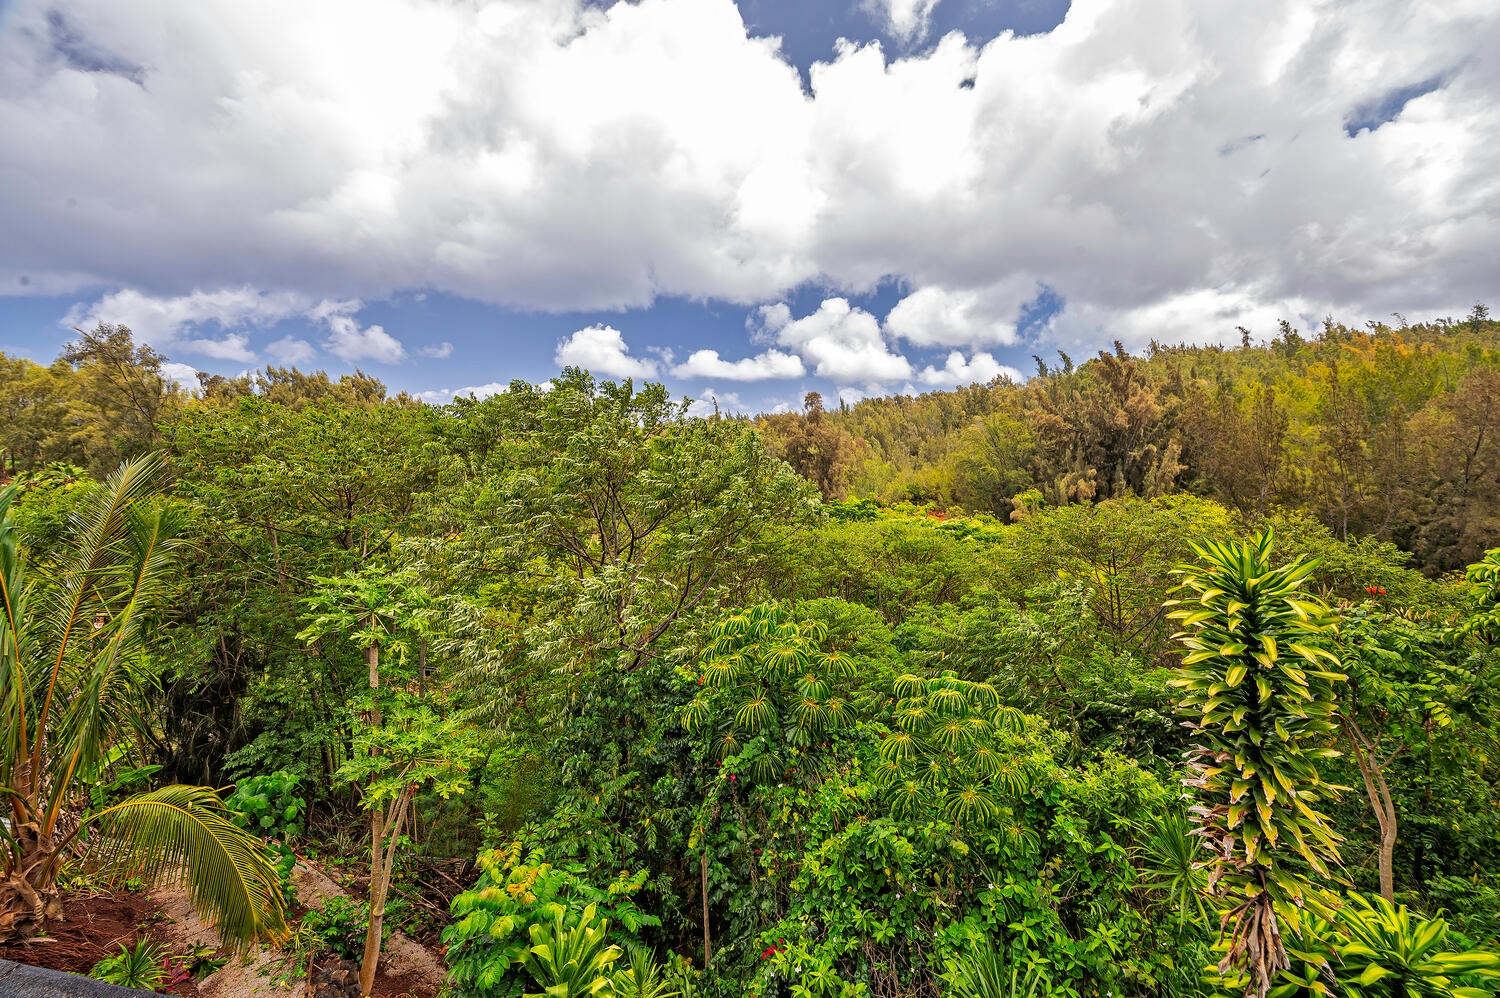 Haleiwa Vacation Rentals, Mele Makana - Thanks to the Forest Reserve, there's beautiful sights of Oahu's forest from the home